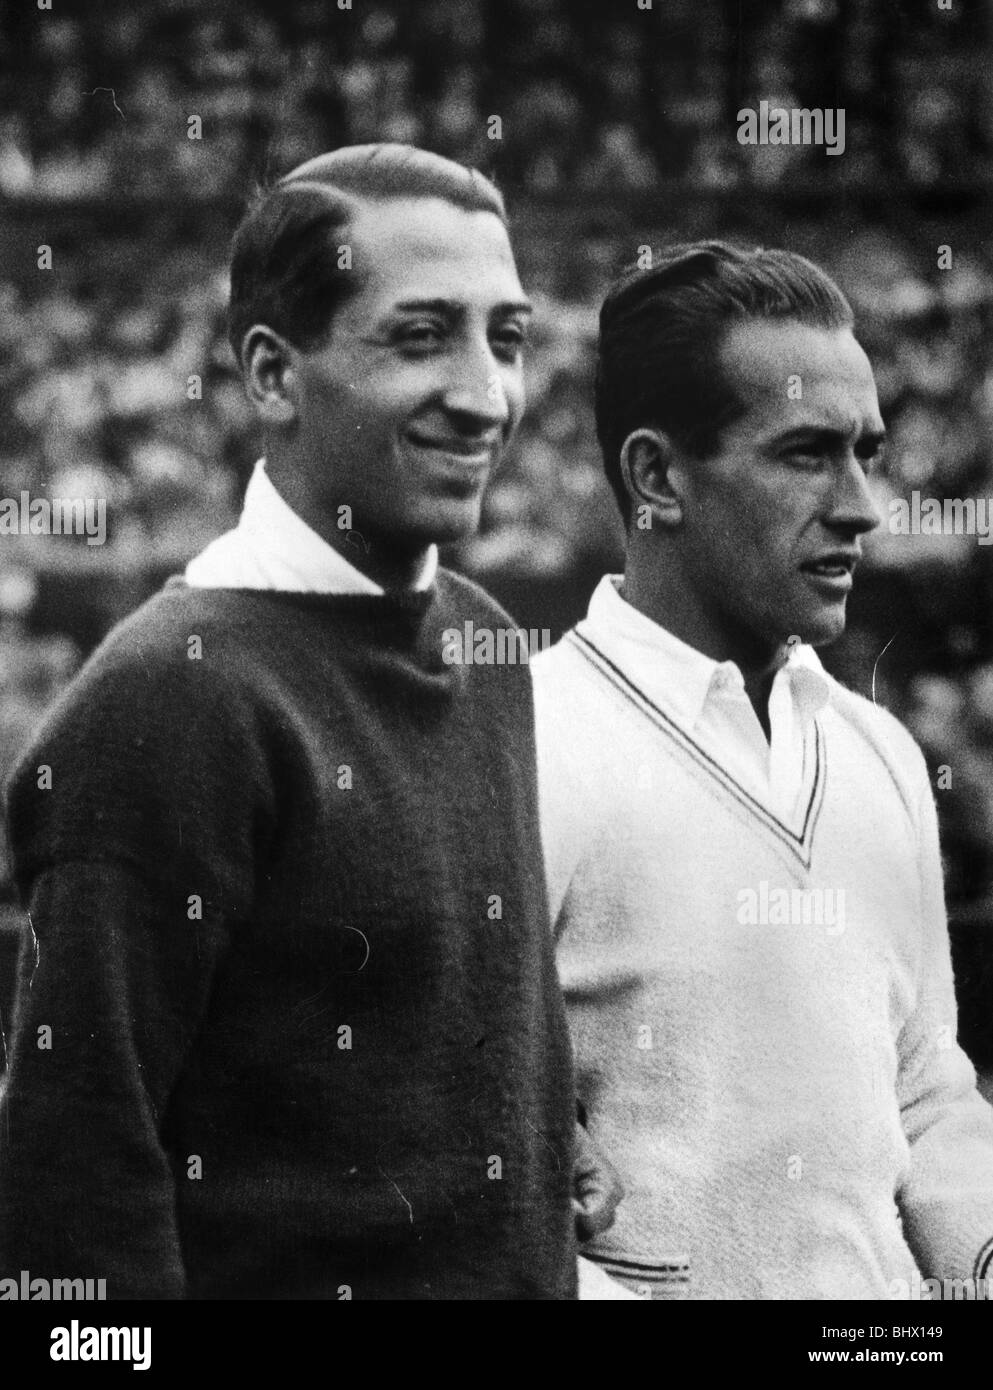 Rene Lacoste (left) and Henri Cochet, two of the Four Musketeers, a group of French tennis players who dominated the game in the second half of the 1920s and early 1930s. 11th July 1928. Stock Photo